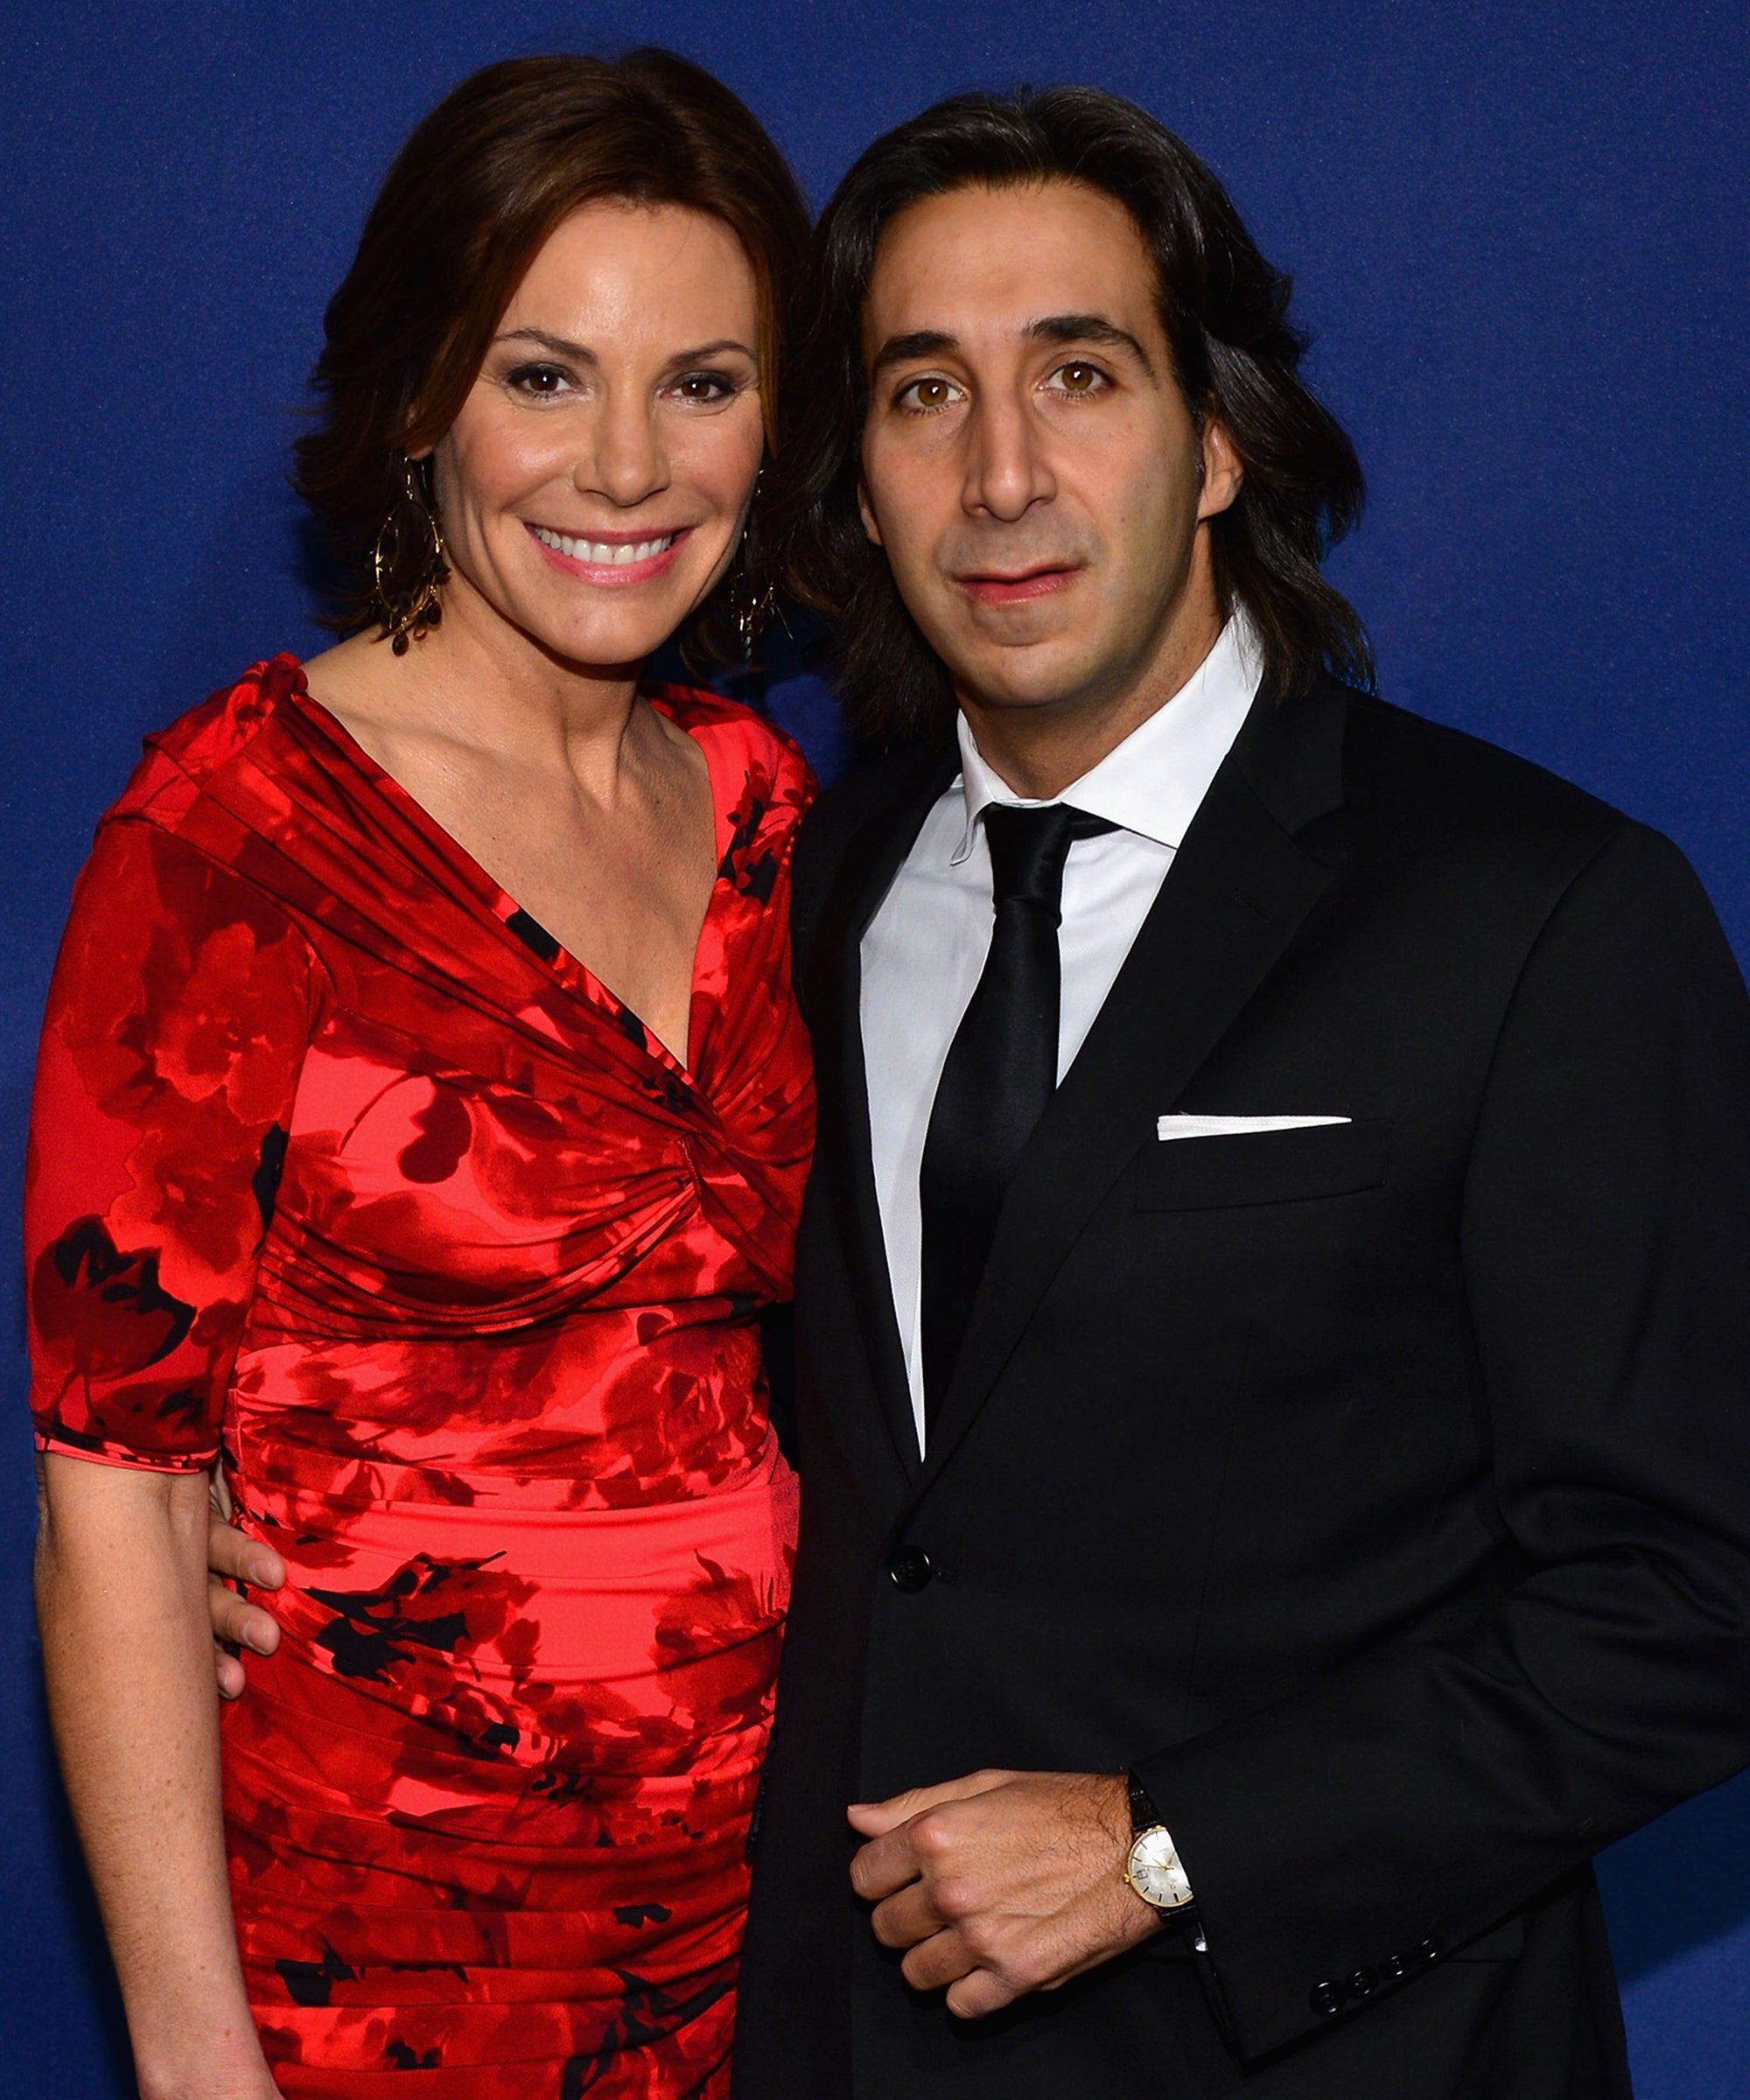 When Did Luann And Jacques Break Up On Real Housewives? photo